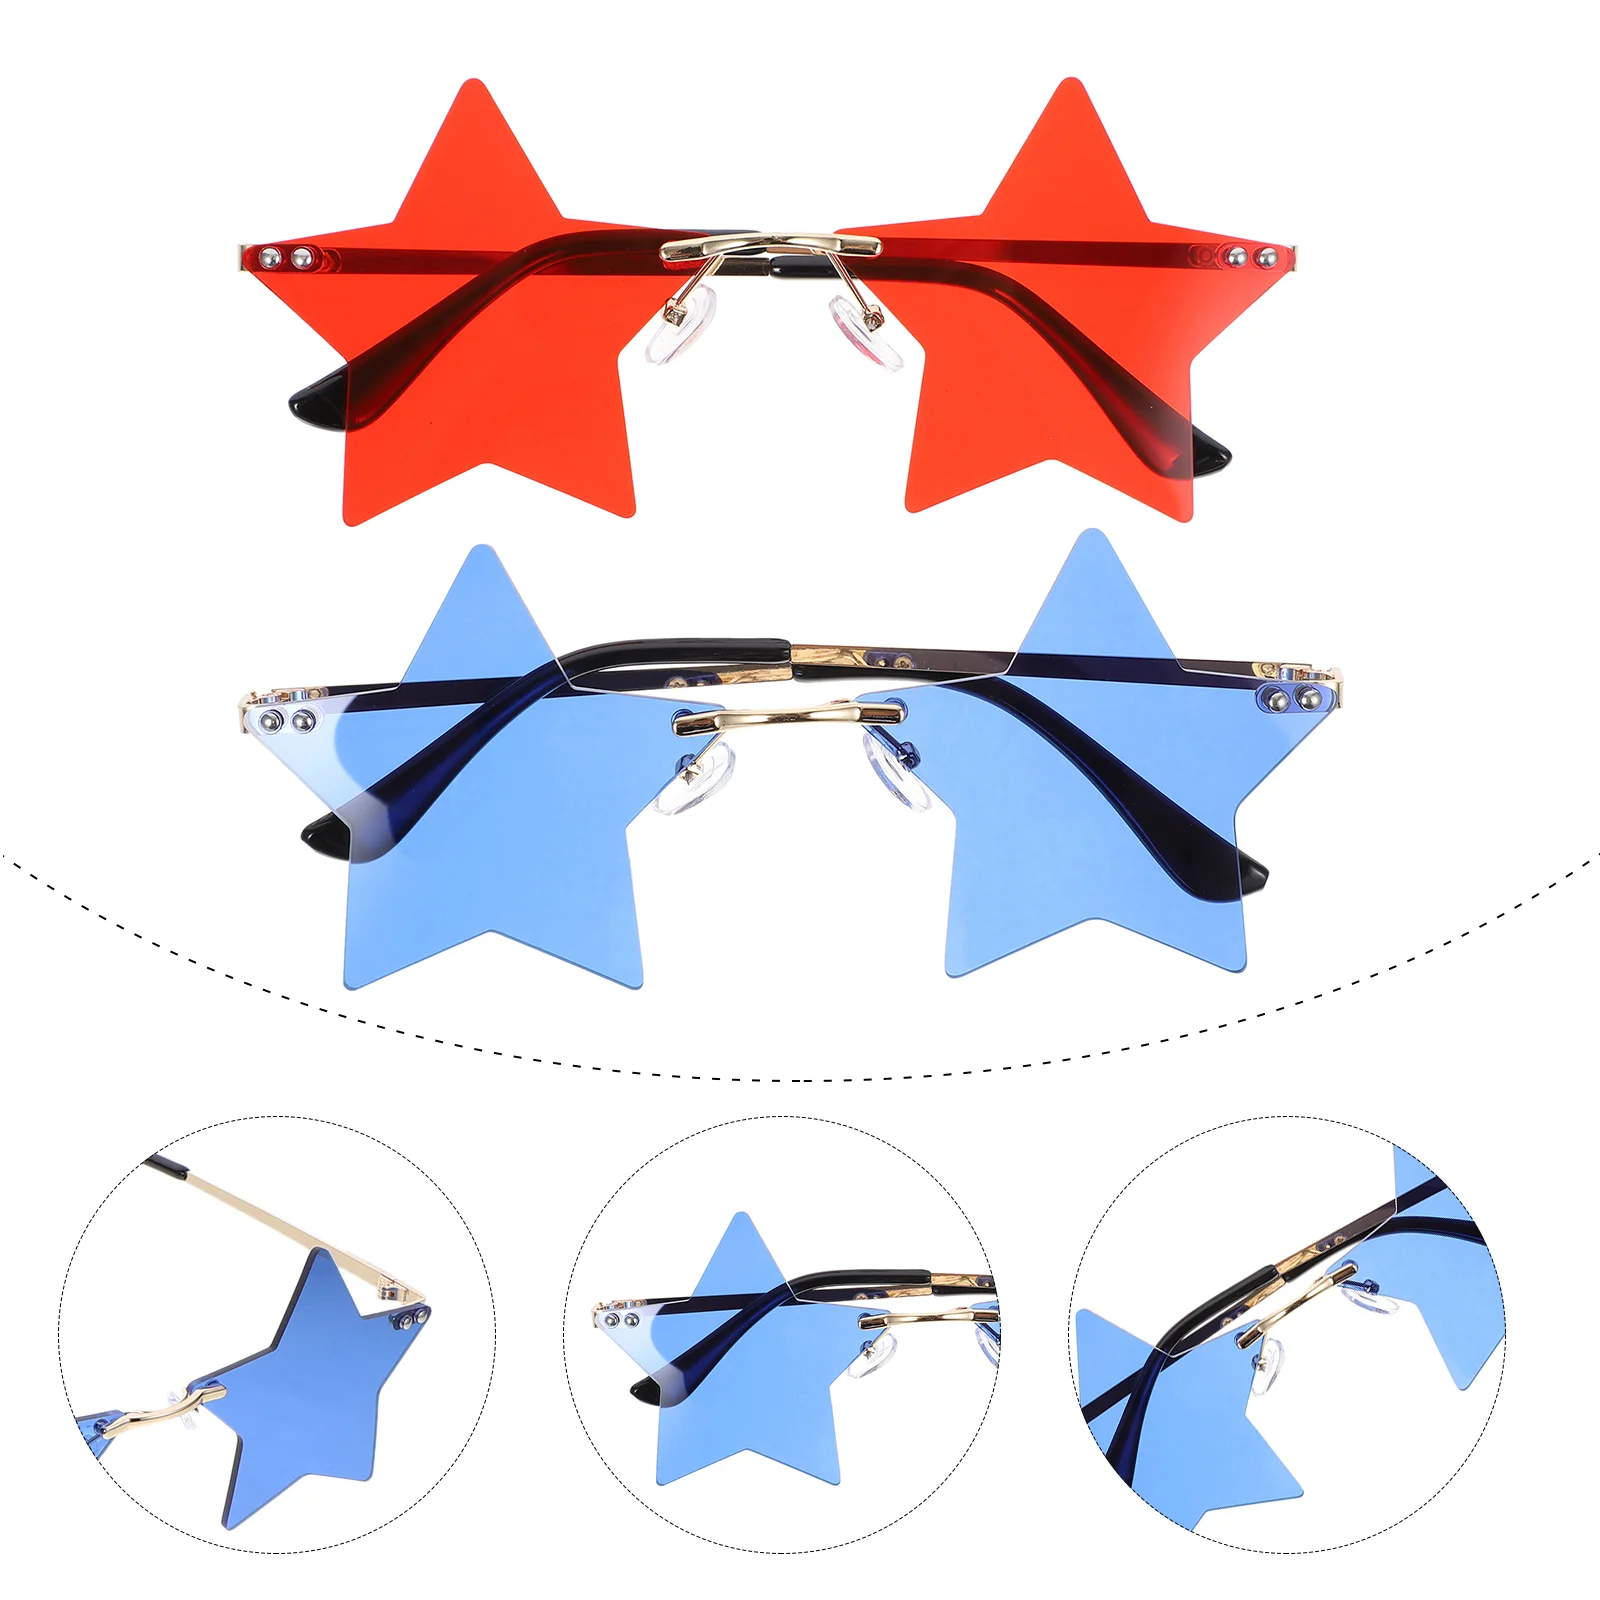 

2 Pcs Star Glasses Rimless Sunglasses Dance Party Decorations Eyeglasses 4th July Nativity Ornaments Kids Independence Day